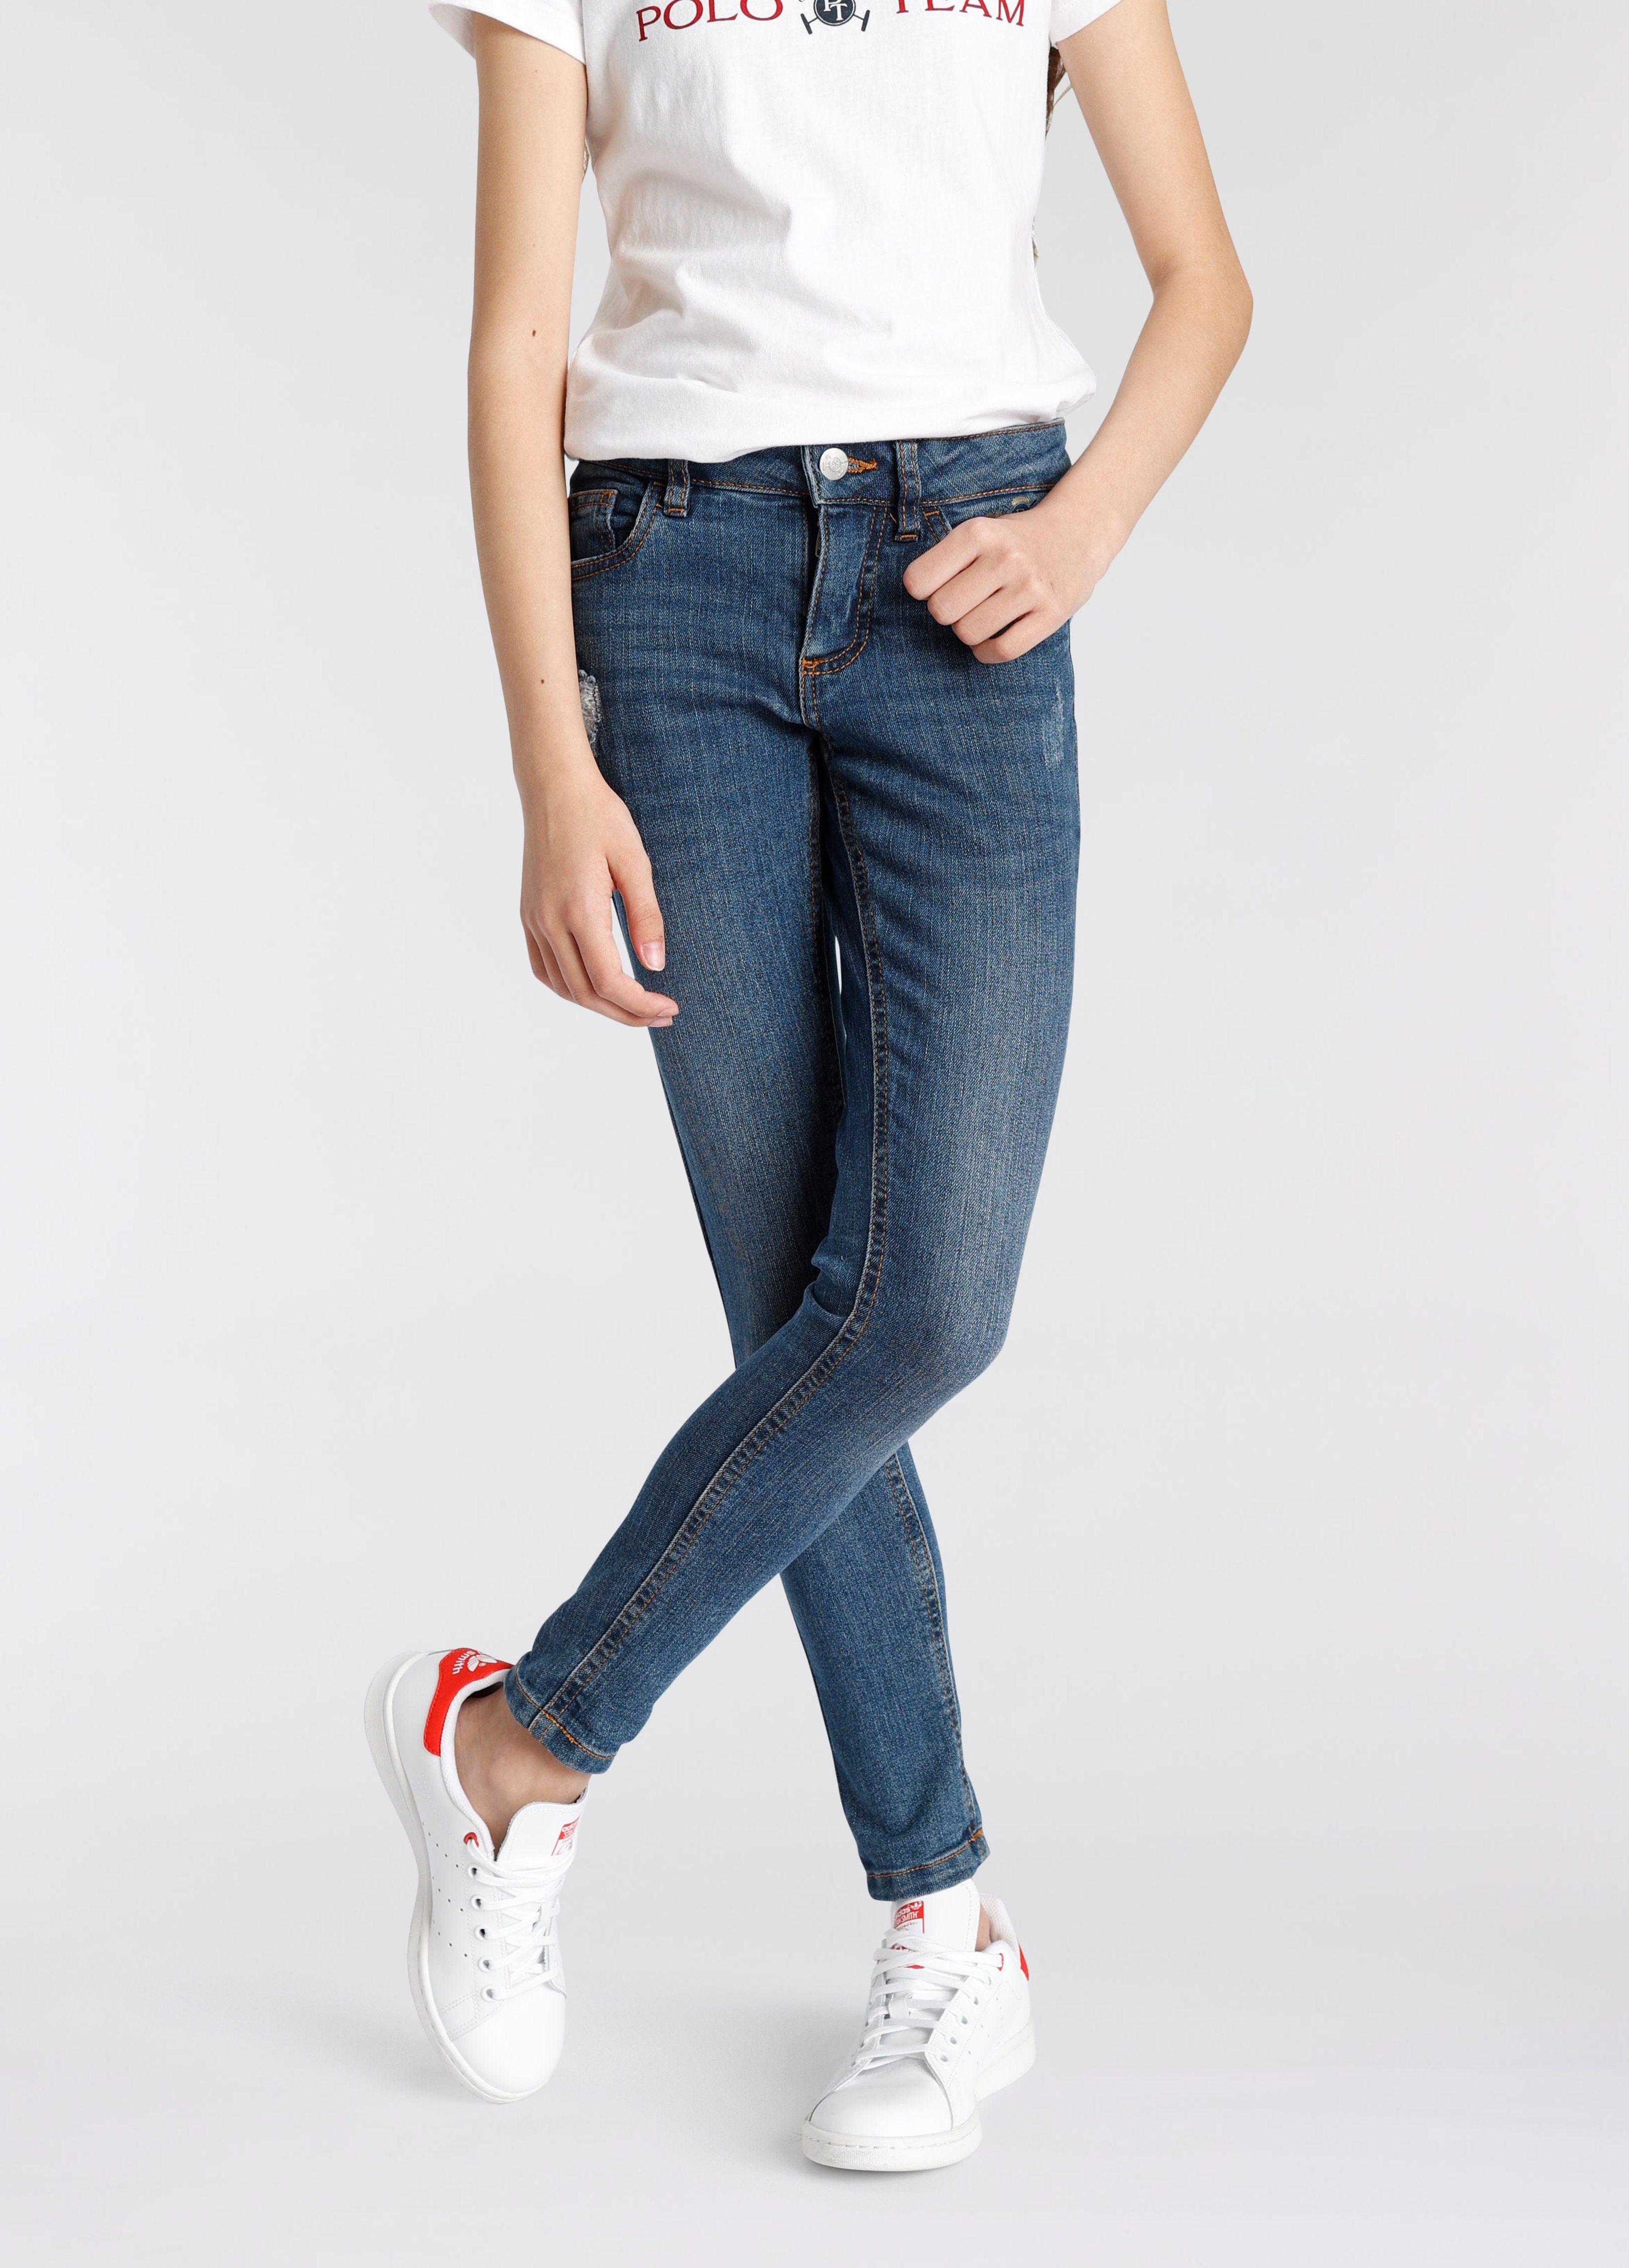 TOM TAILOR Polo Team Stretch-Jeans super skinny Form online kaufen | OTTO